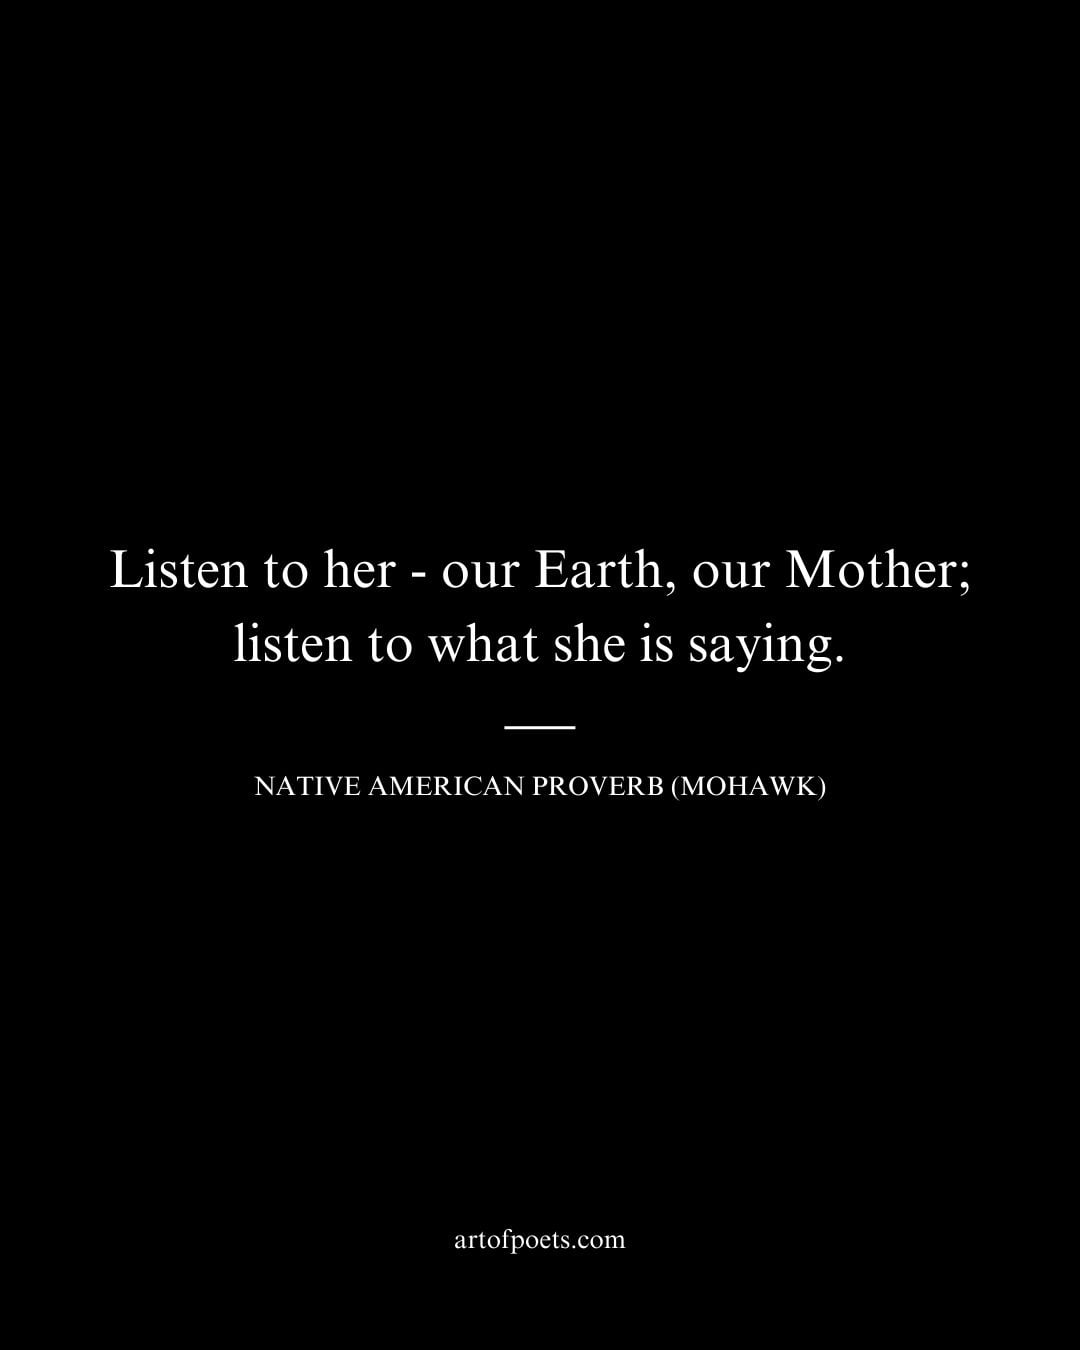 Listen to her — our Earth our Mother listen to what she is saying